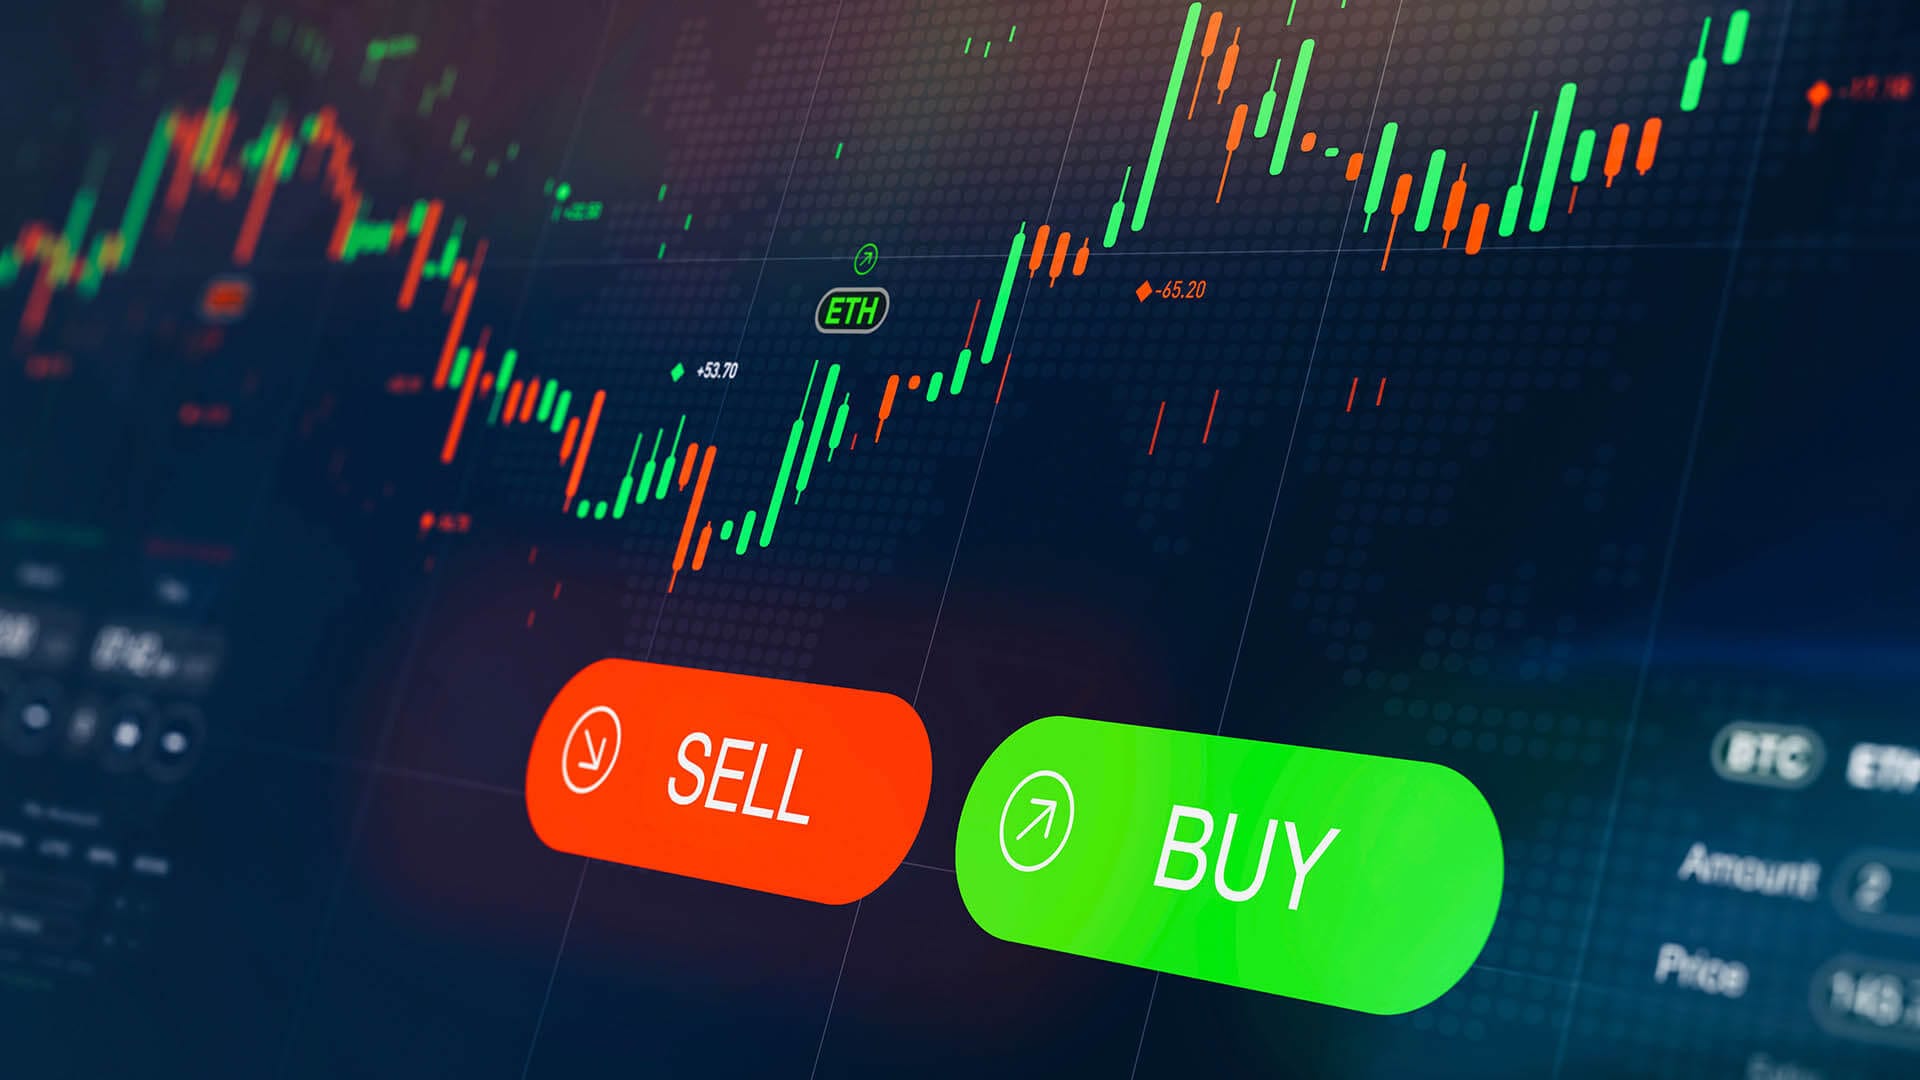 HOW TO TRADE IN STOCK MARKET